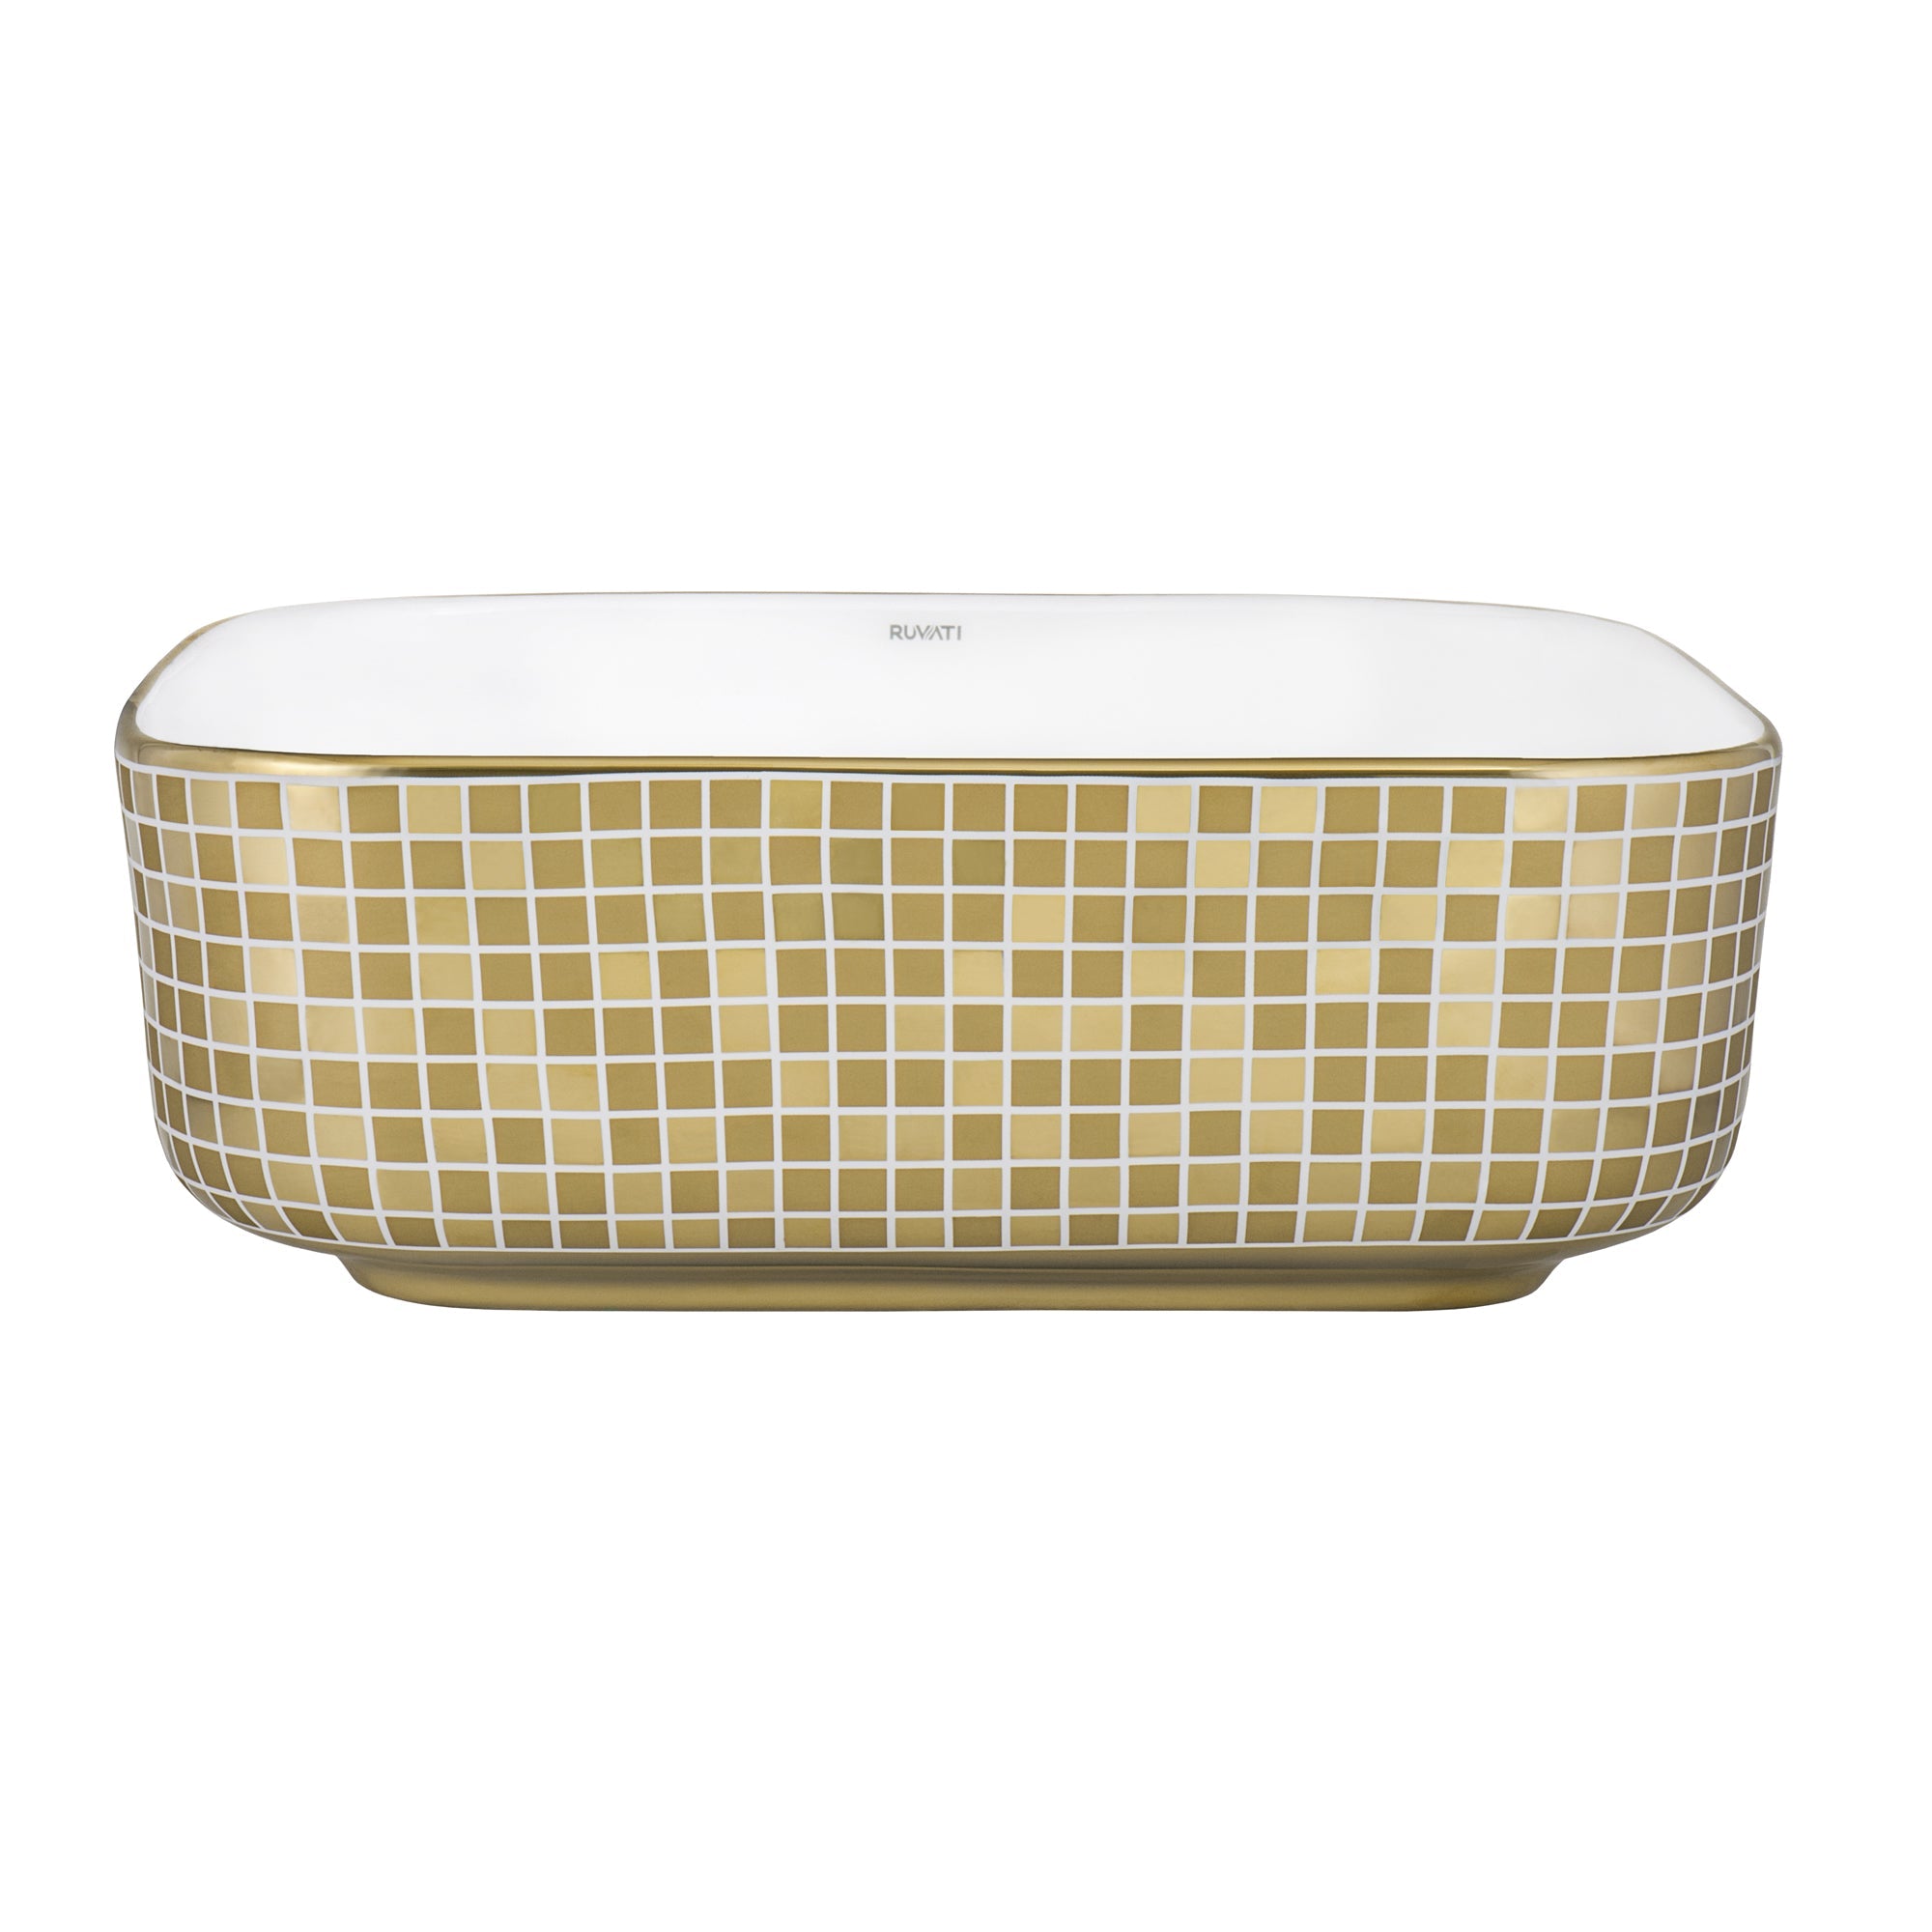 Ruvati 15" x 15" Bathroom Vessel Sink with Gold Pattern Exterior in White